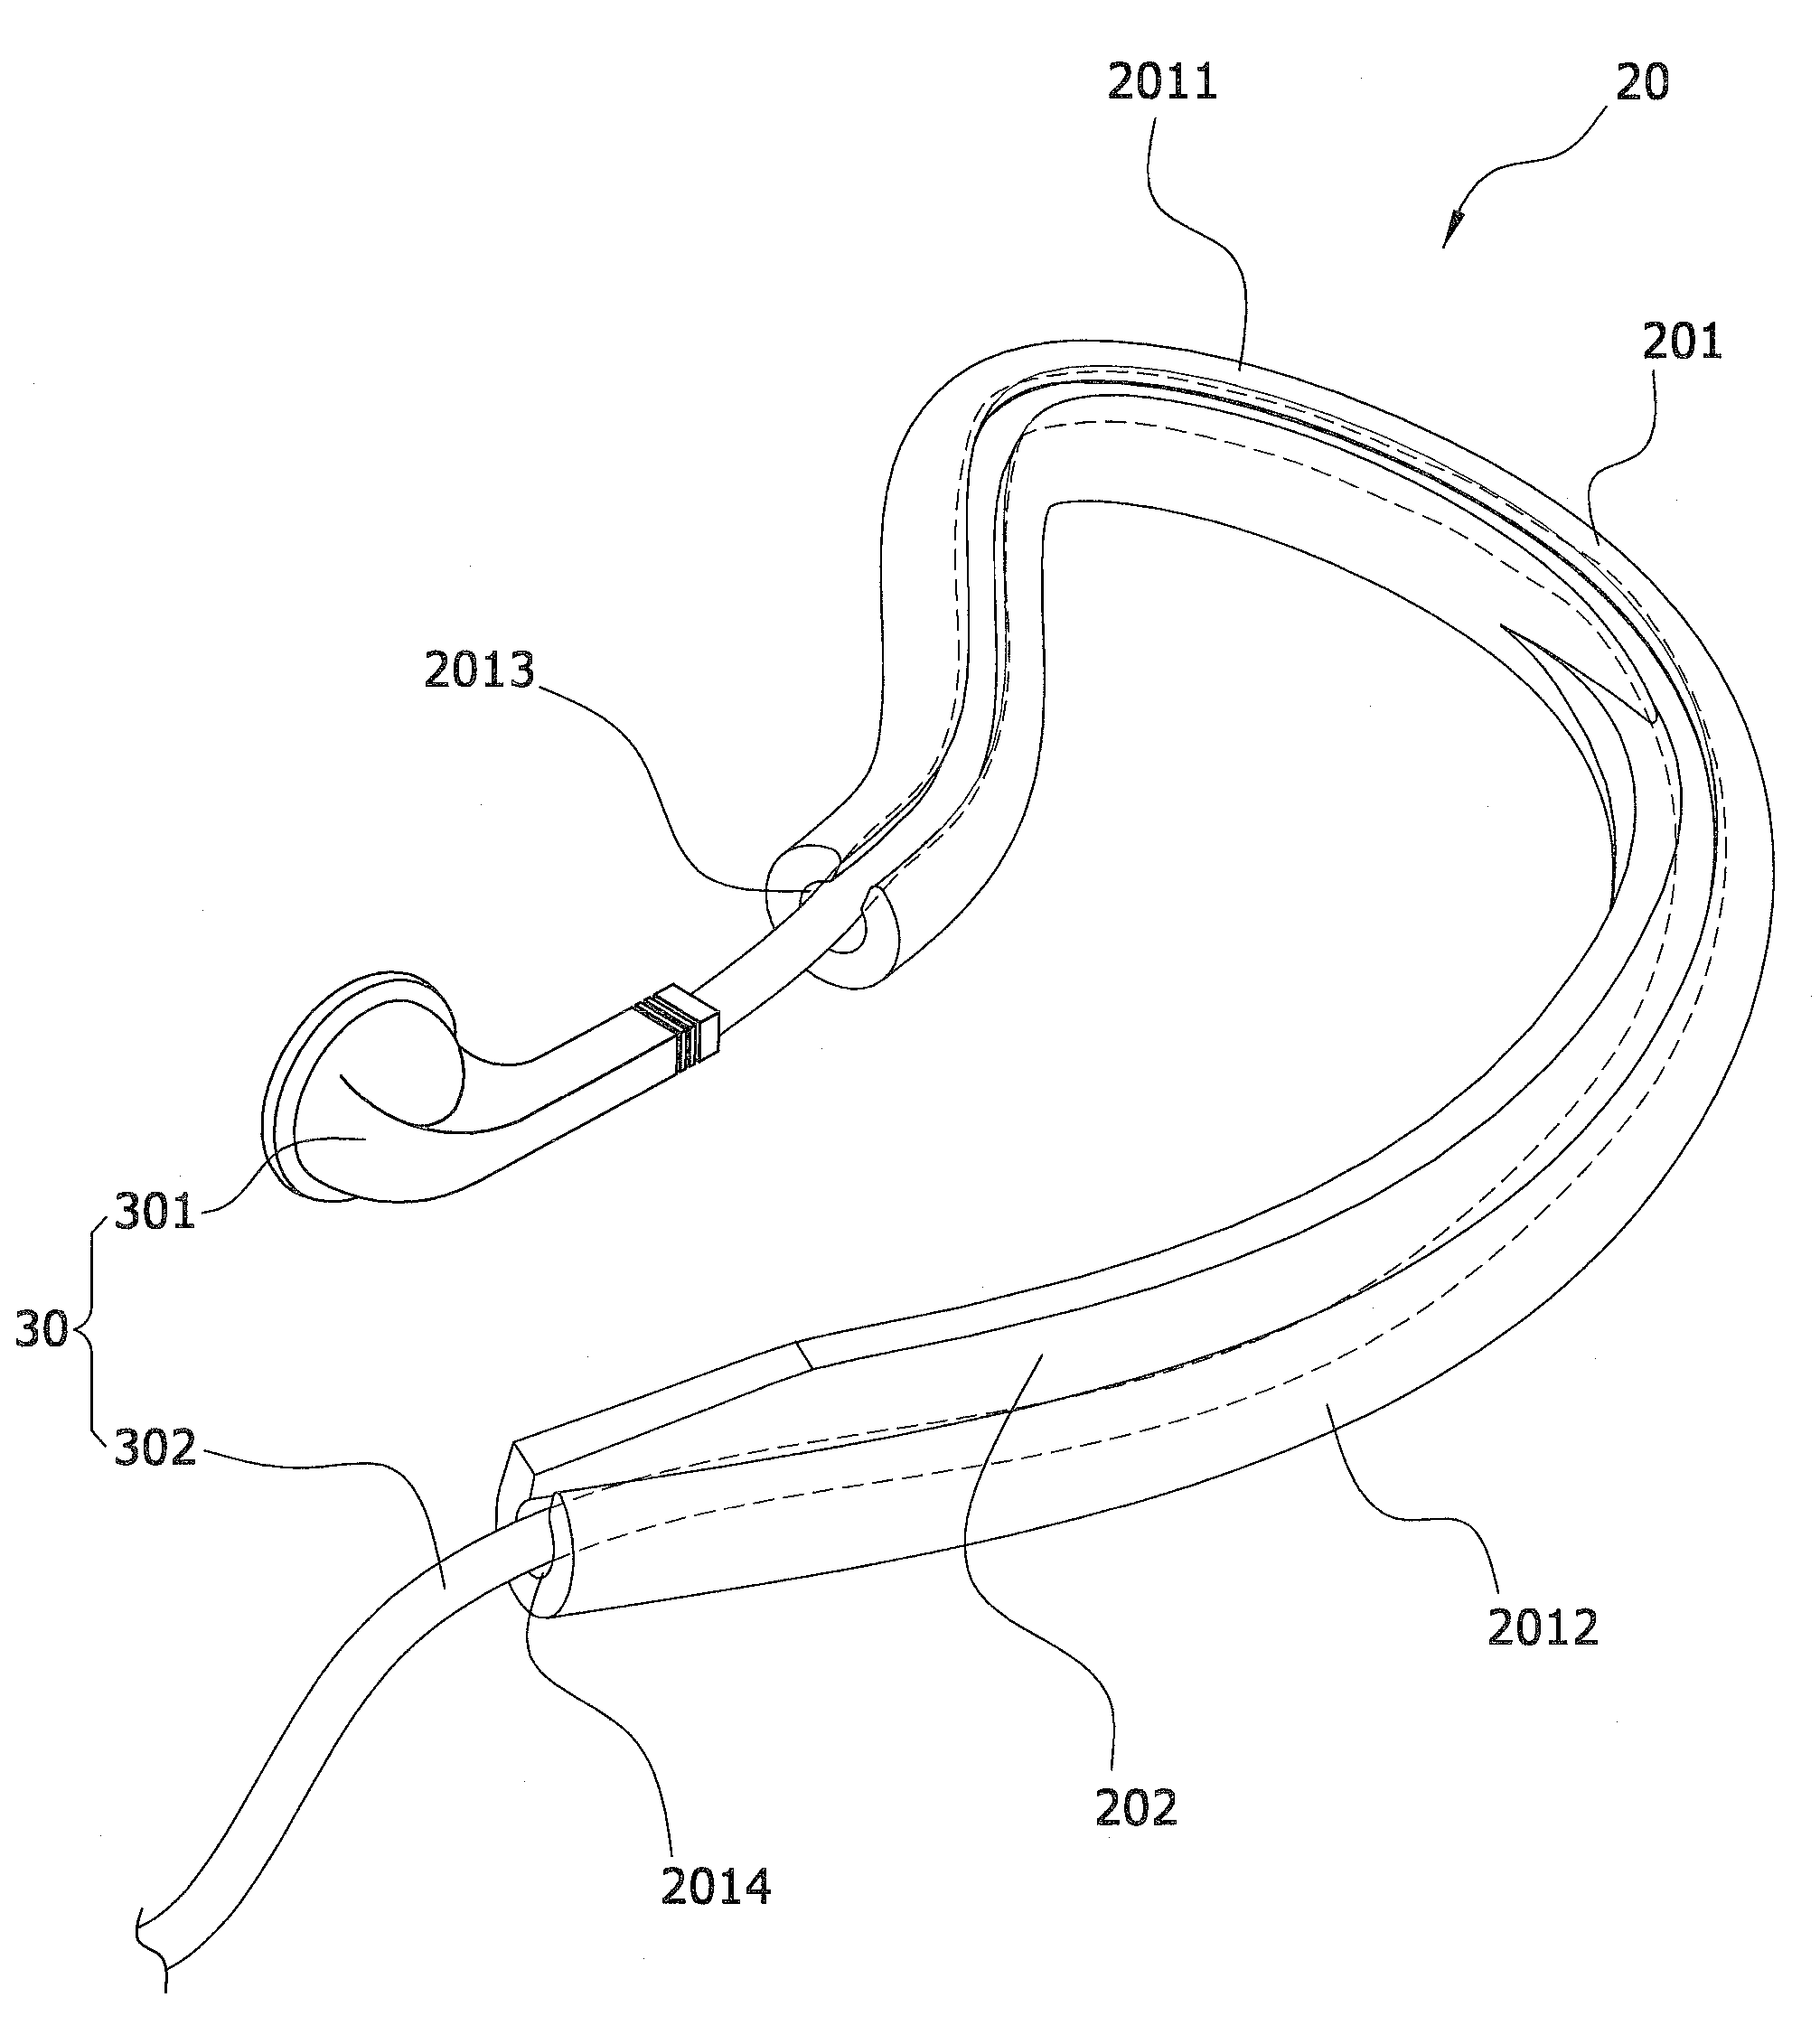 Structure of over-the-ear hook